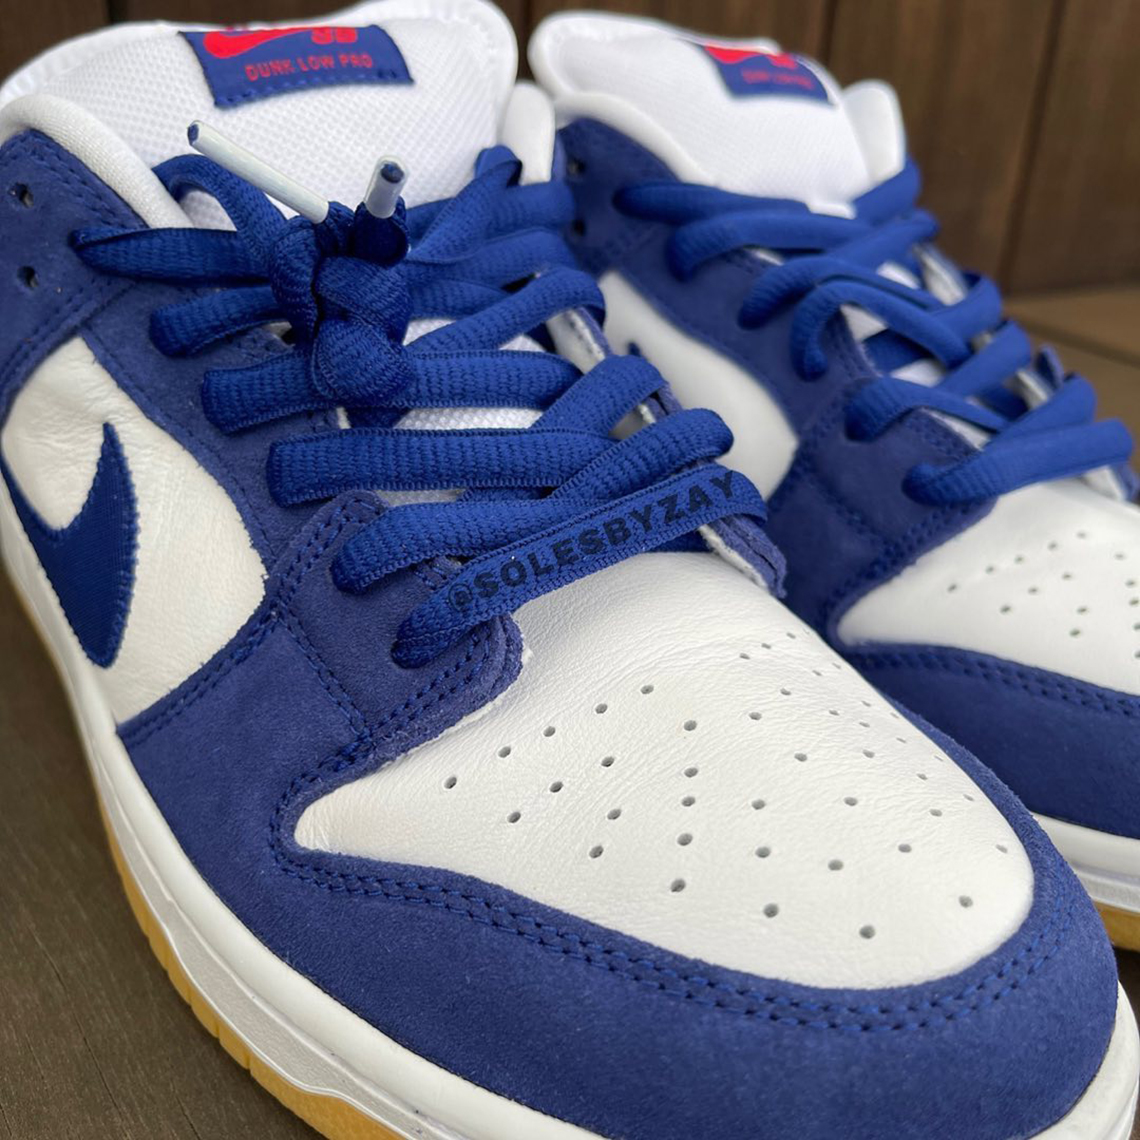 Nike SB Dunk Low “Los Angeles Dodgers” Gets a Release Date and